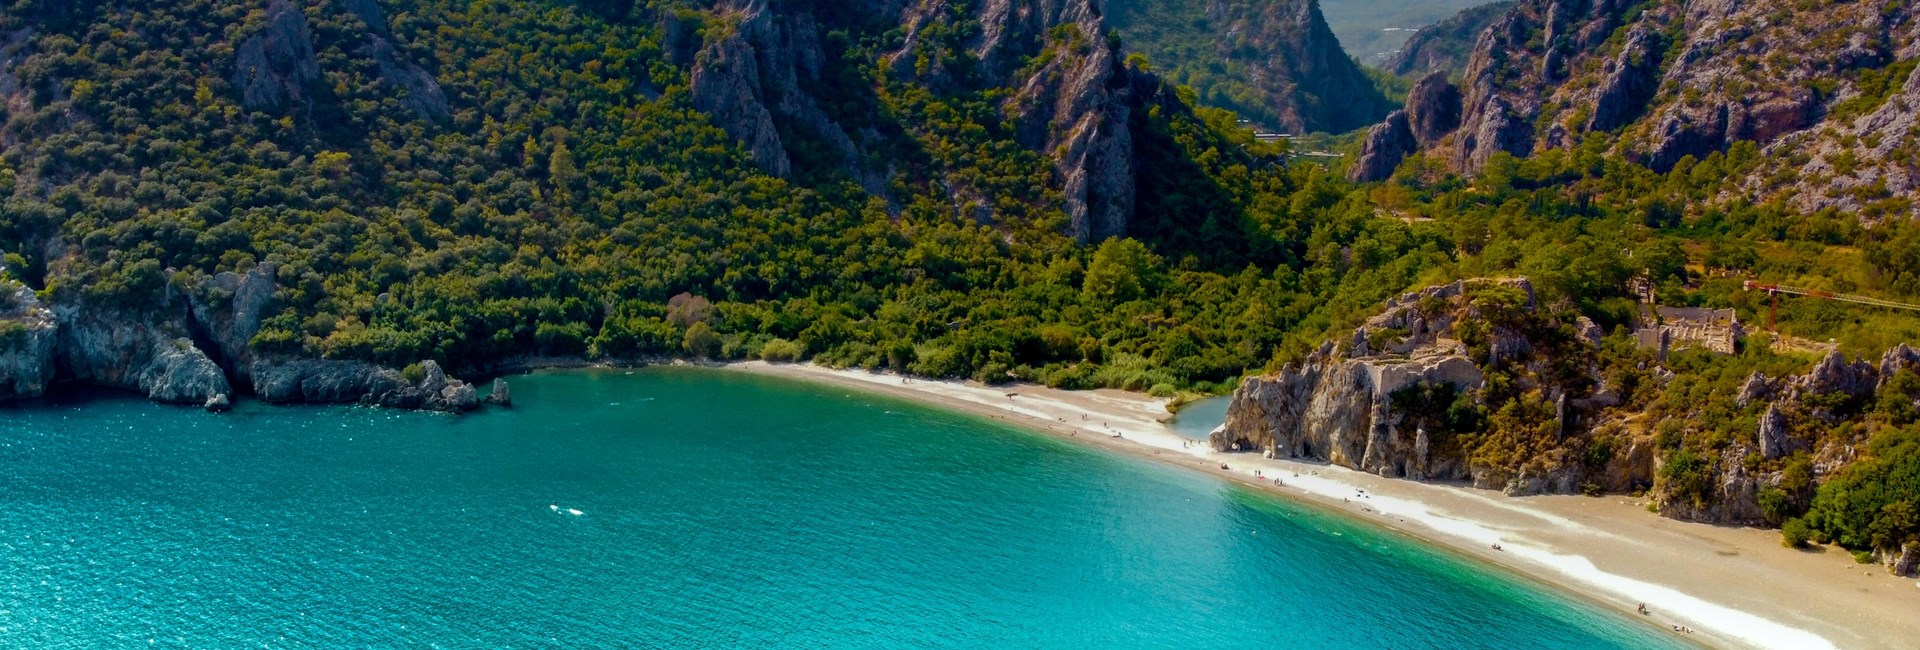 Sarsala Koyu Cove with turquoise sea in foreground, yellow sandy beach and verdant mountain backdrop